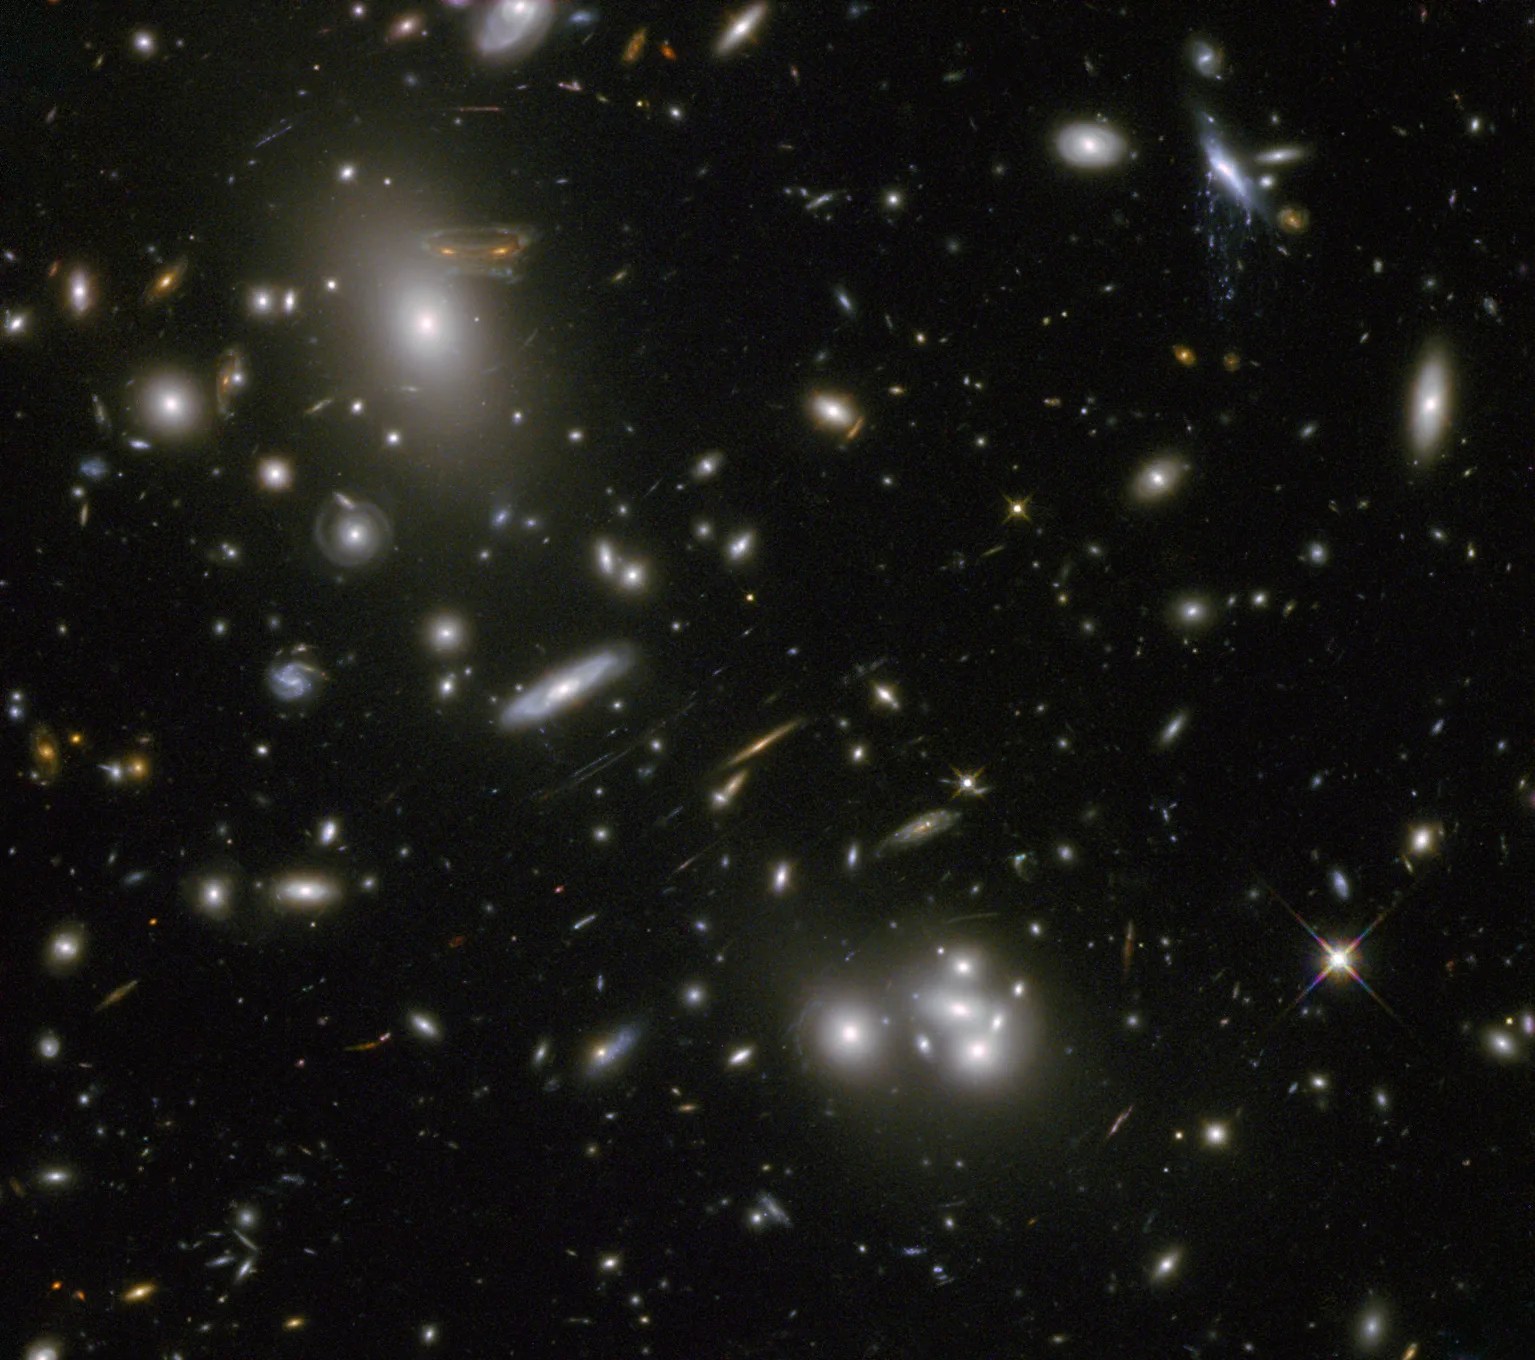 Hubble sees 'space invader' image